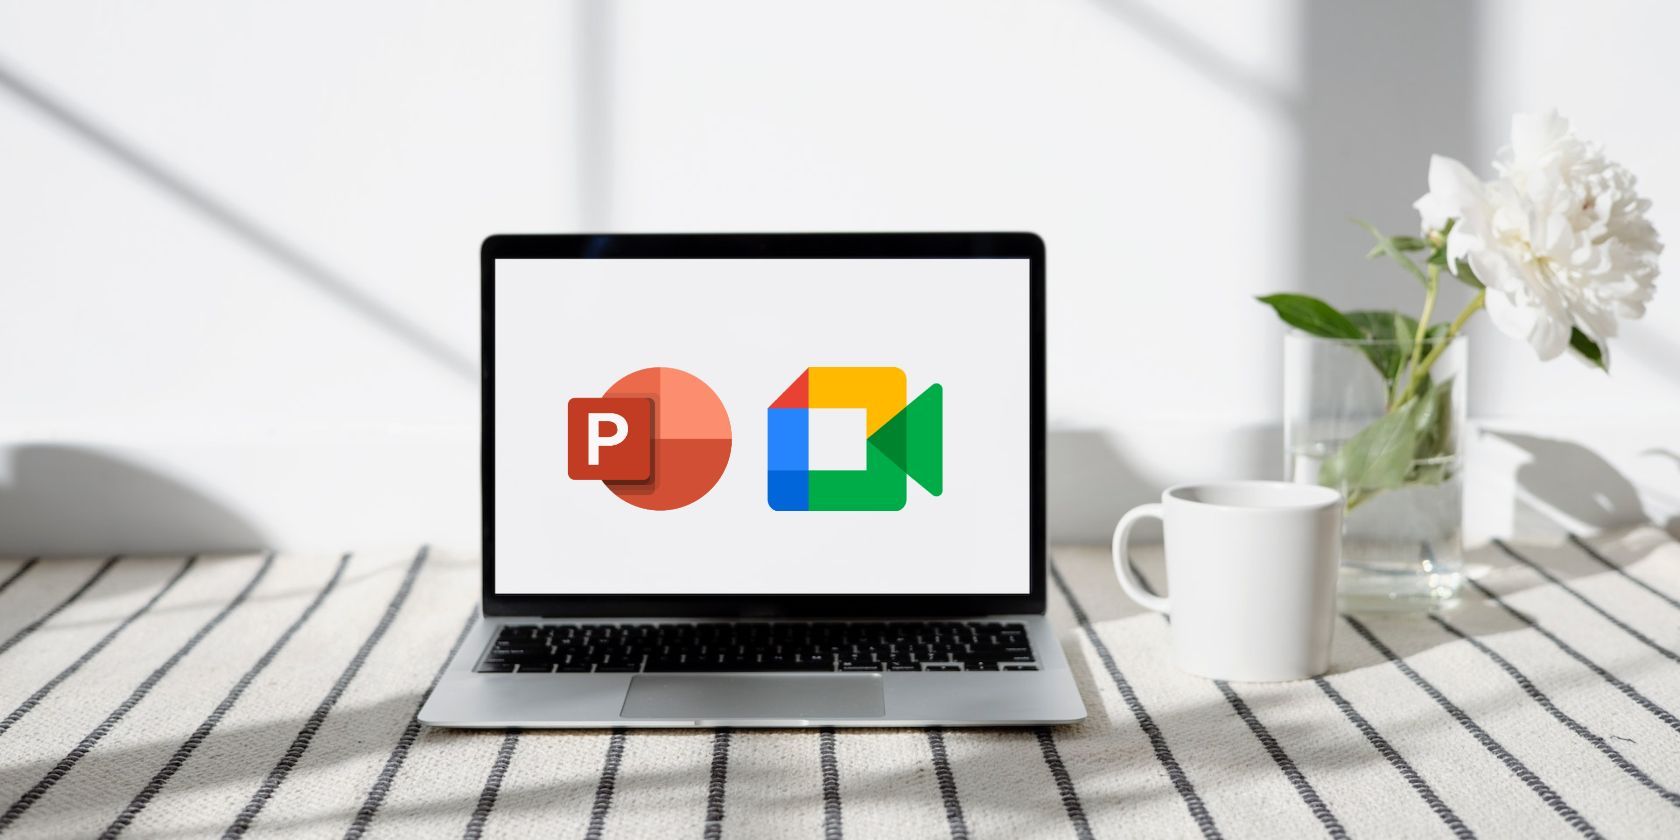 PowerPoint and Google Meet logos on a laptop